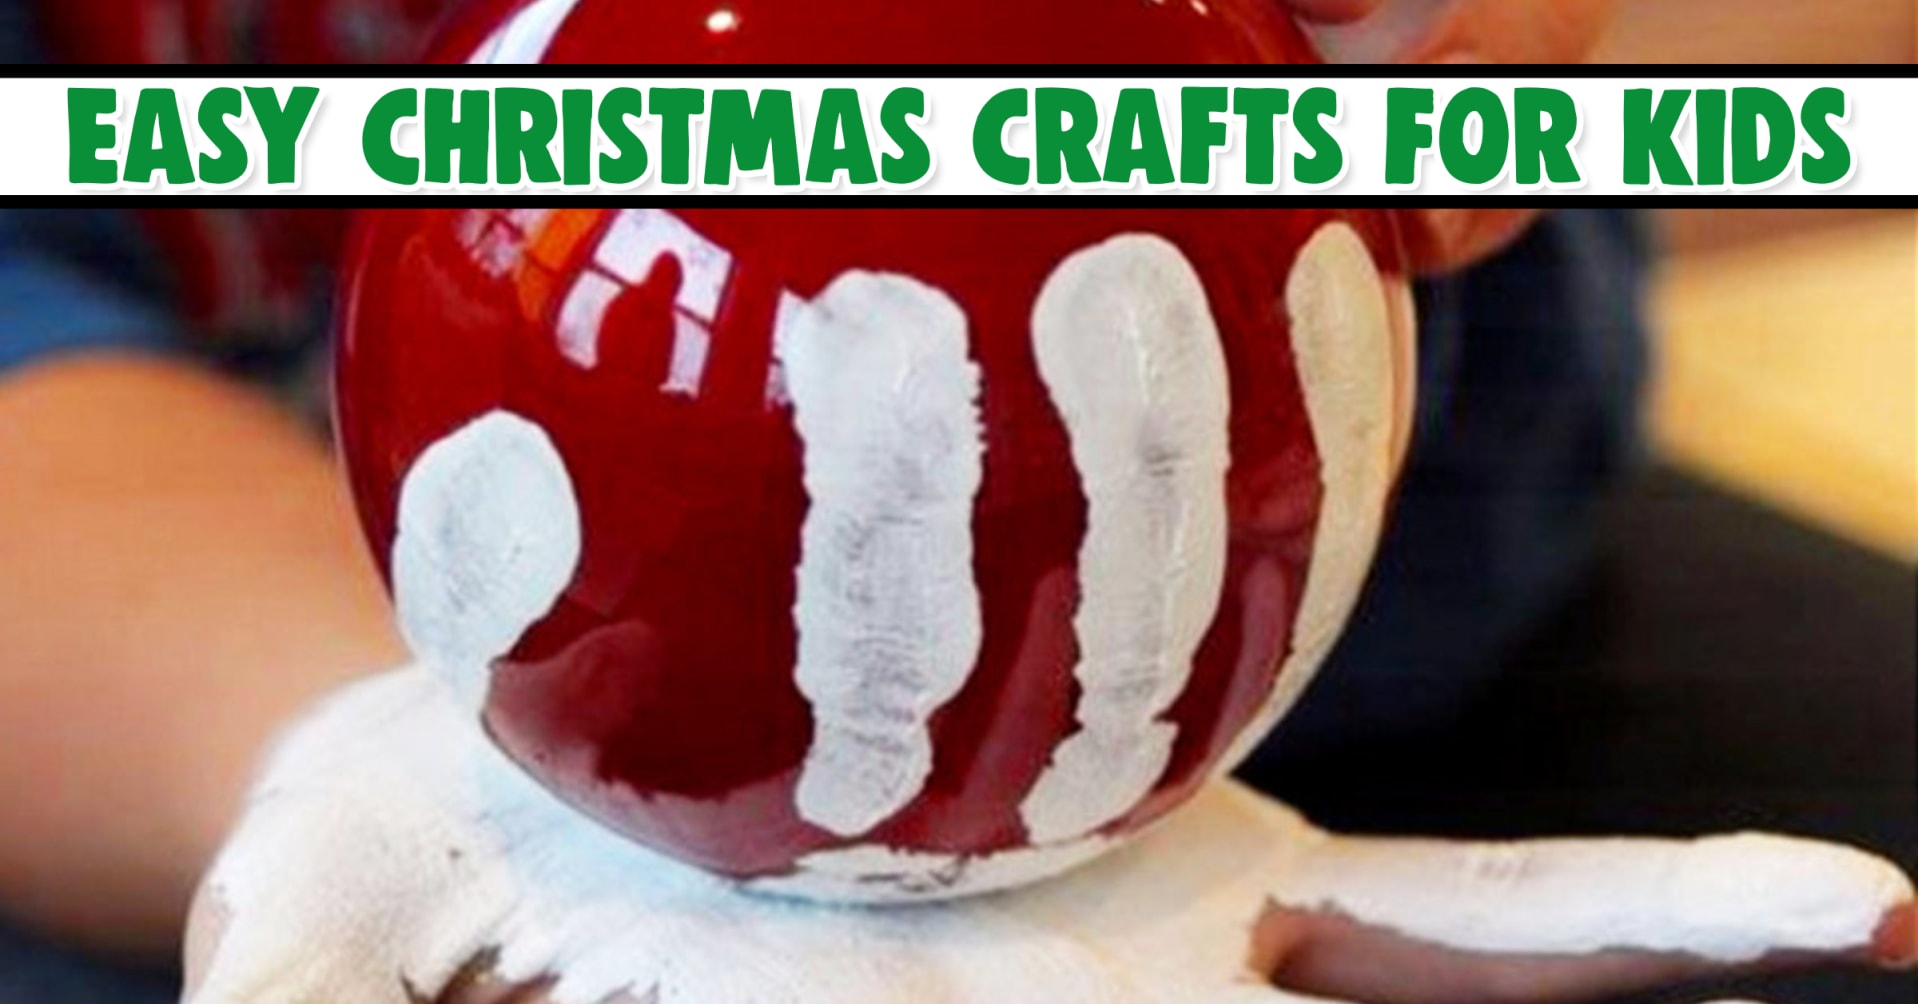 Diy Christmas Crafts For Kids Easy Craft Projects For Christmas 2020